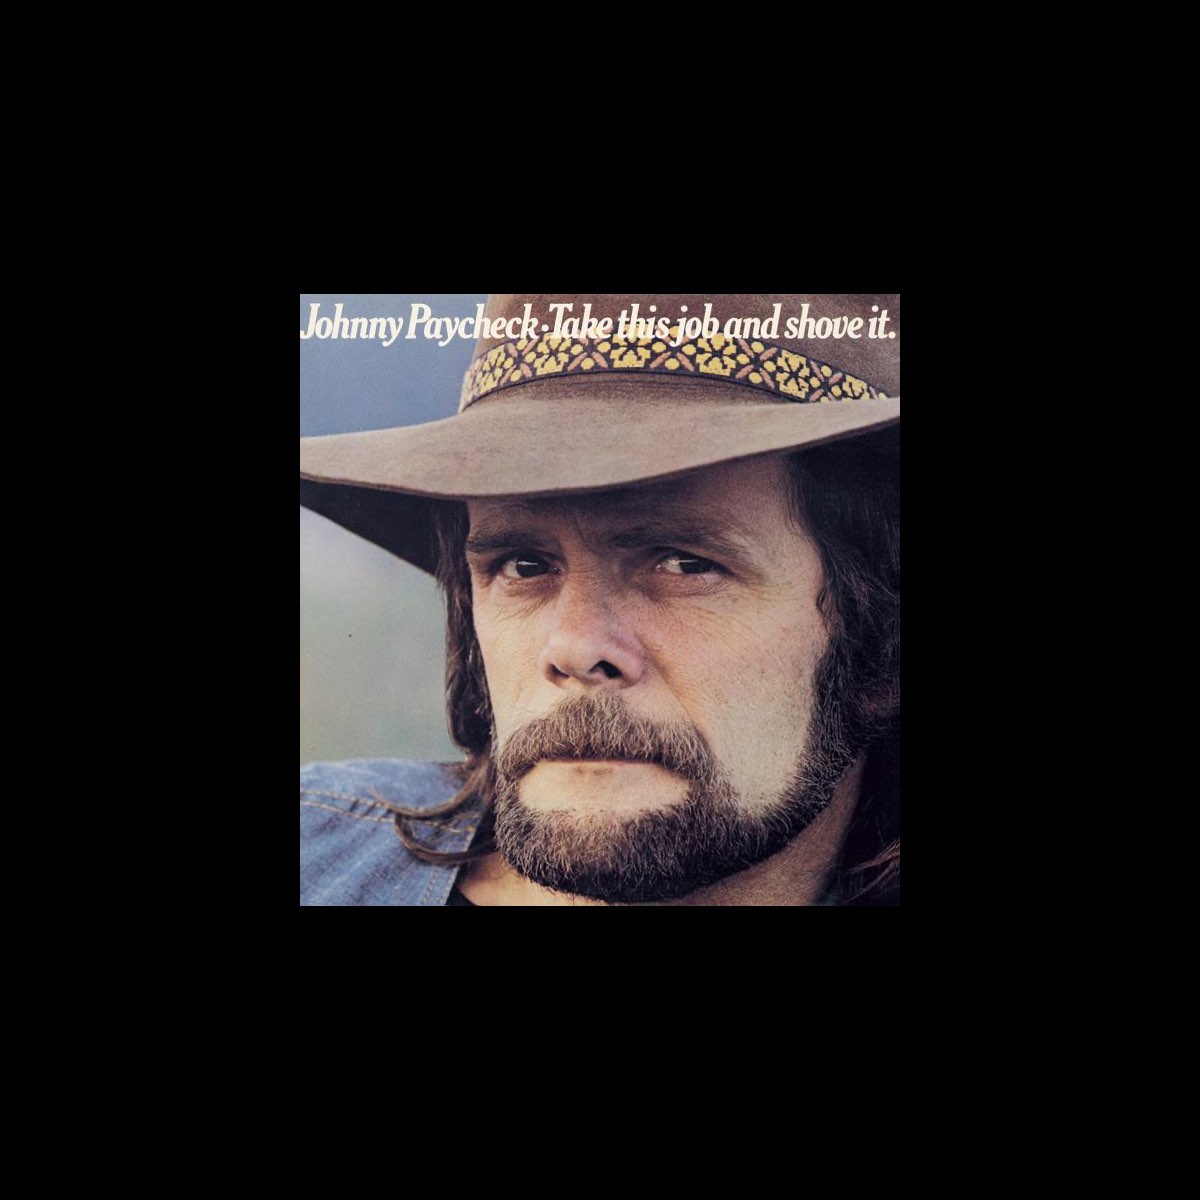 Take This Job and Shove It - Album by Johnny Paycheck - Apple Music